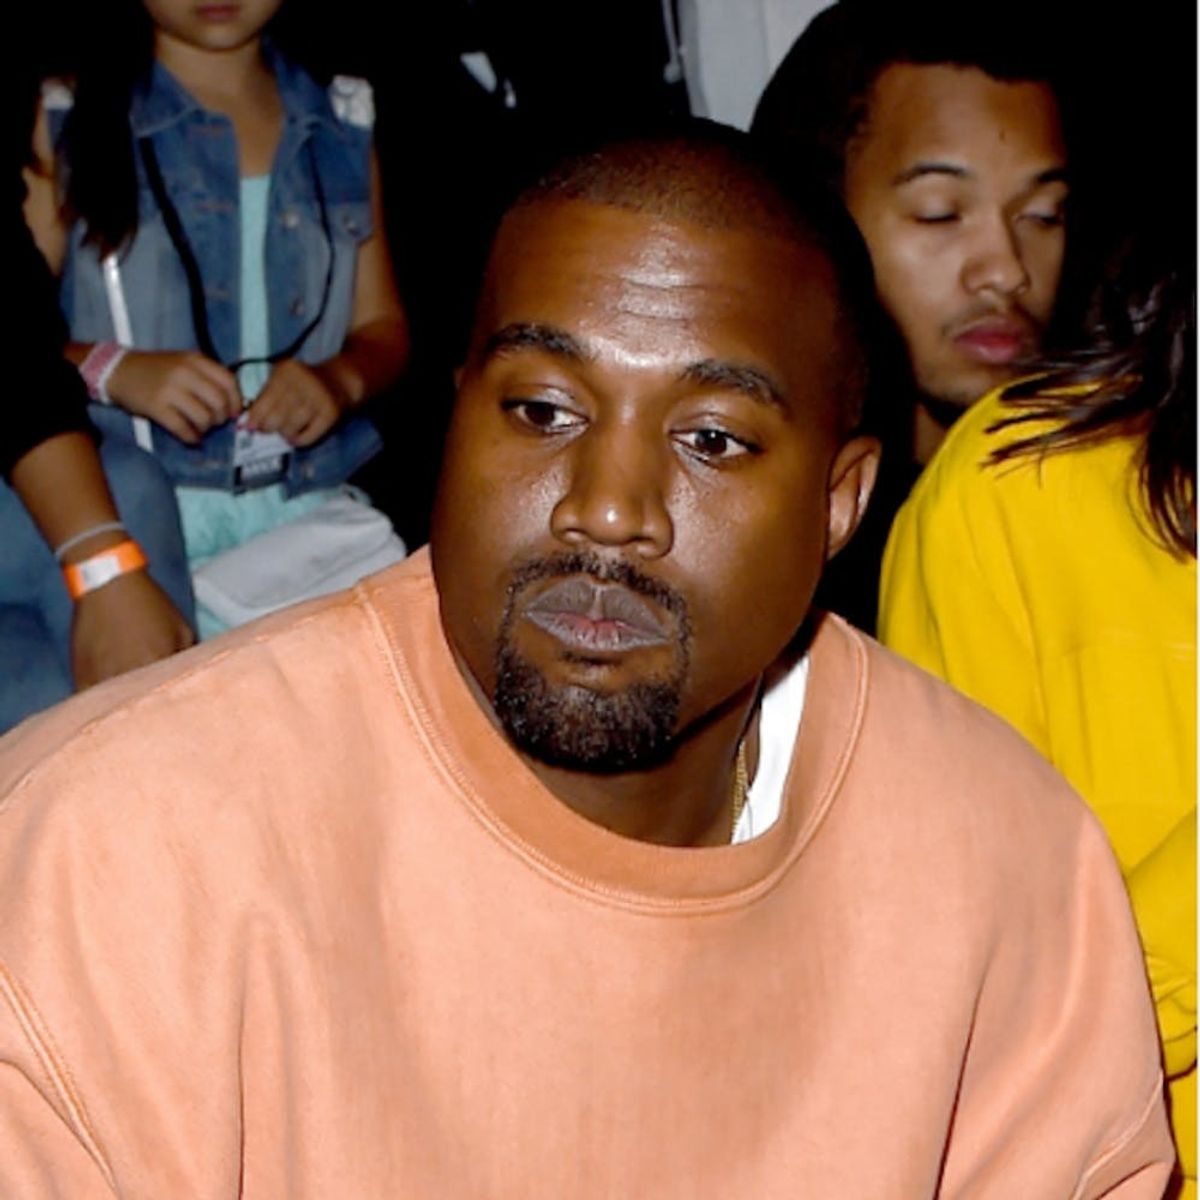 Morning Buzz: Kanye West’s 911 Call Details How Troubling His Behavior Was + More